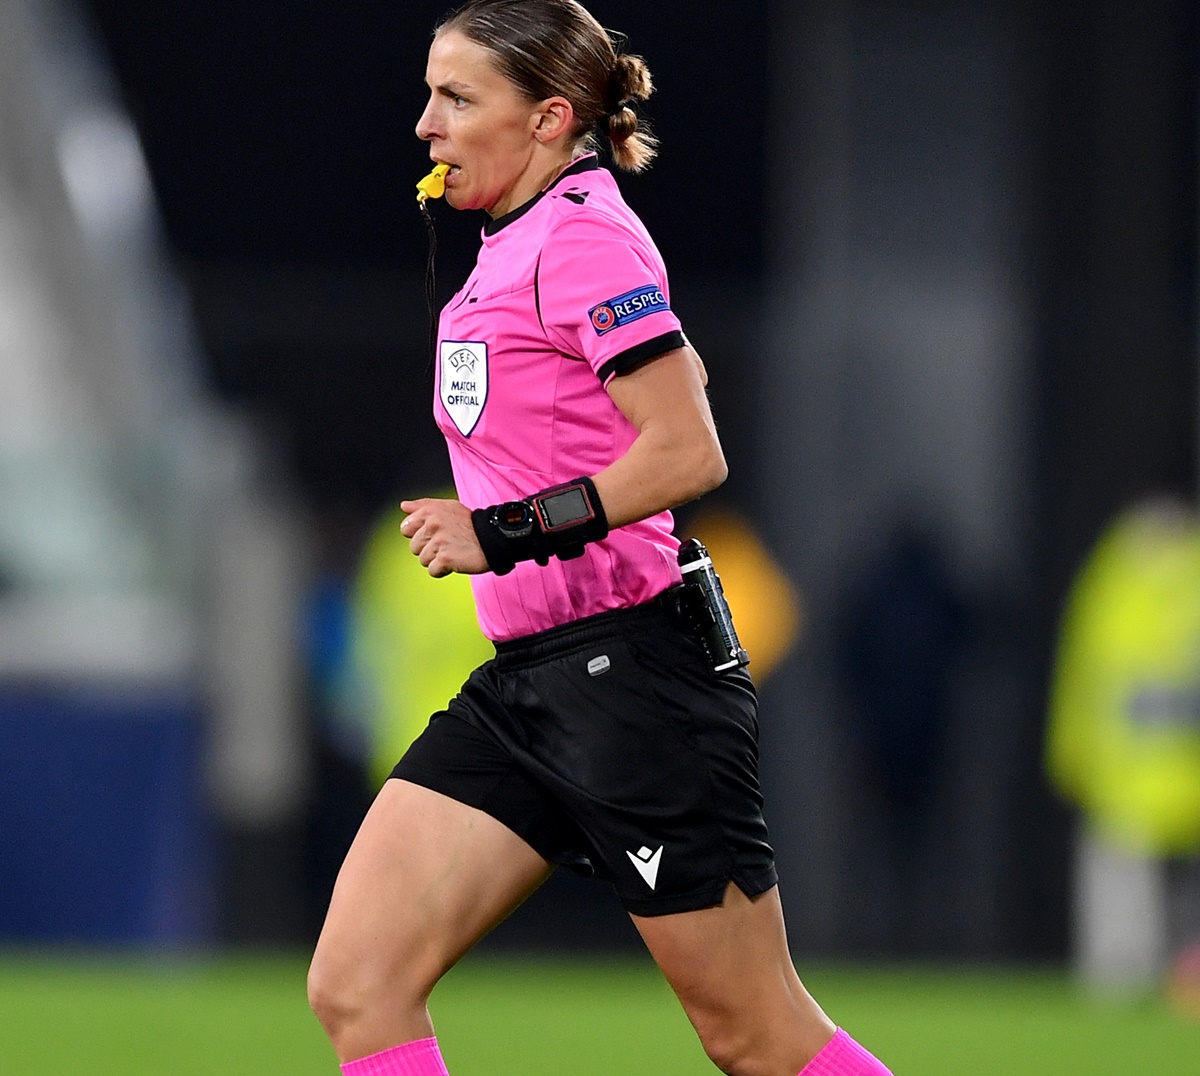 In a first, Qatar FIFA WC to feature female referees